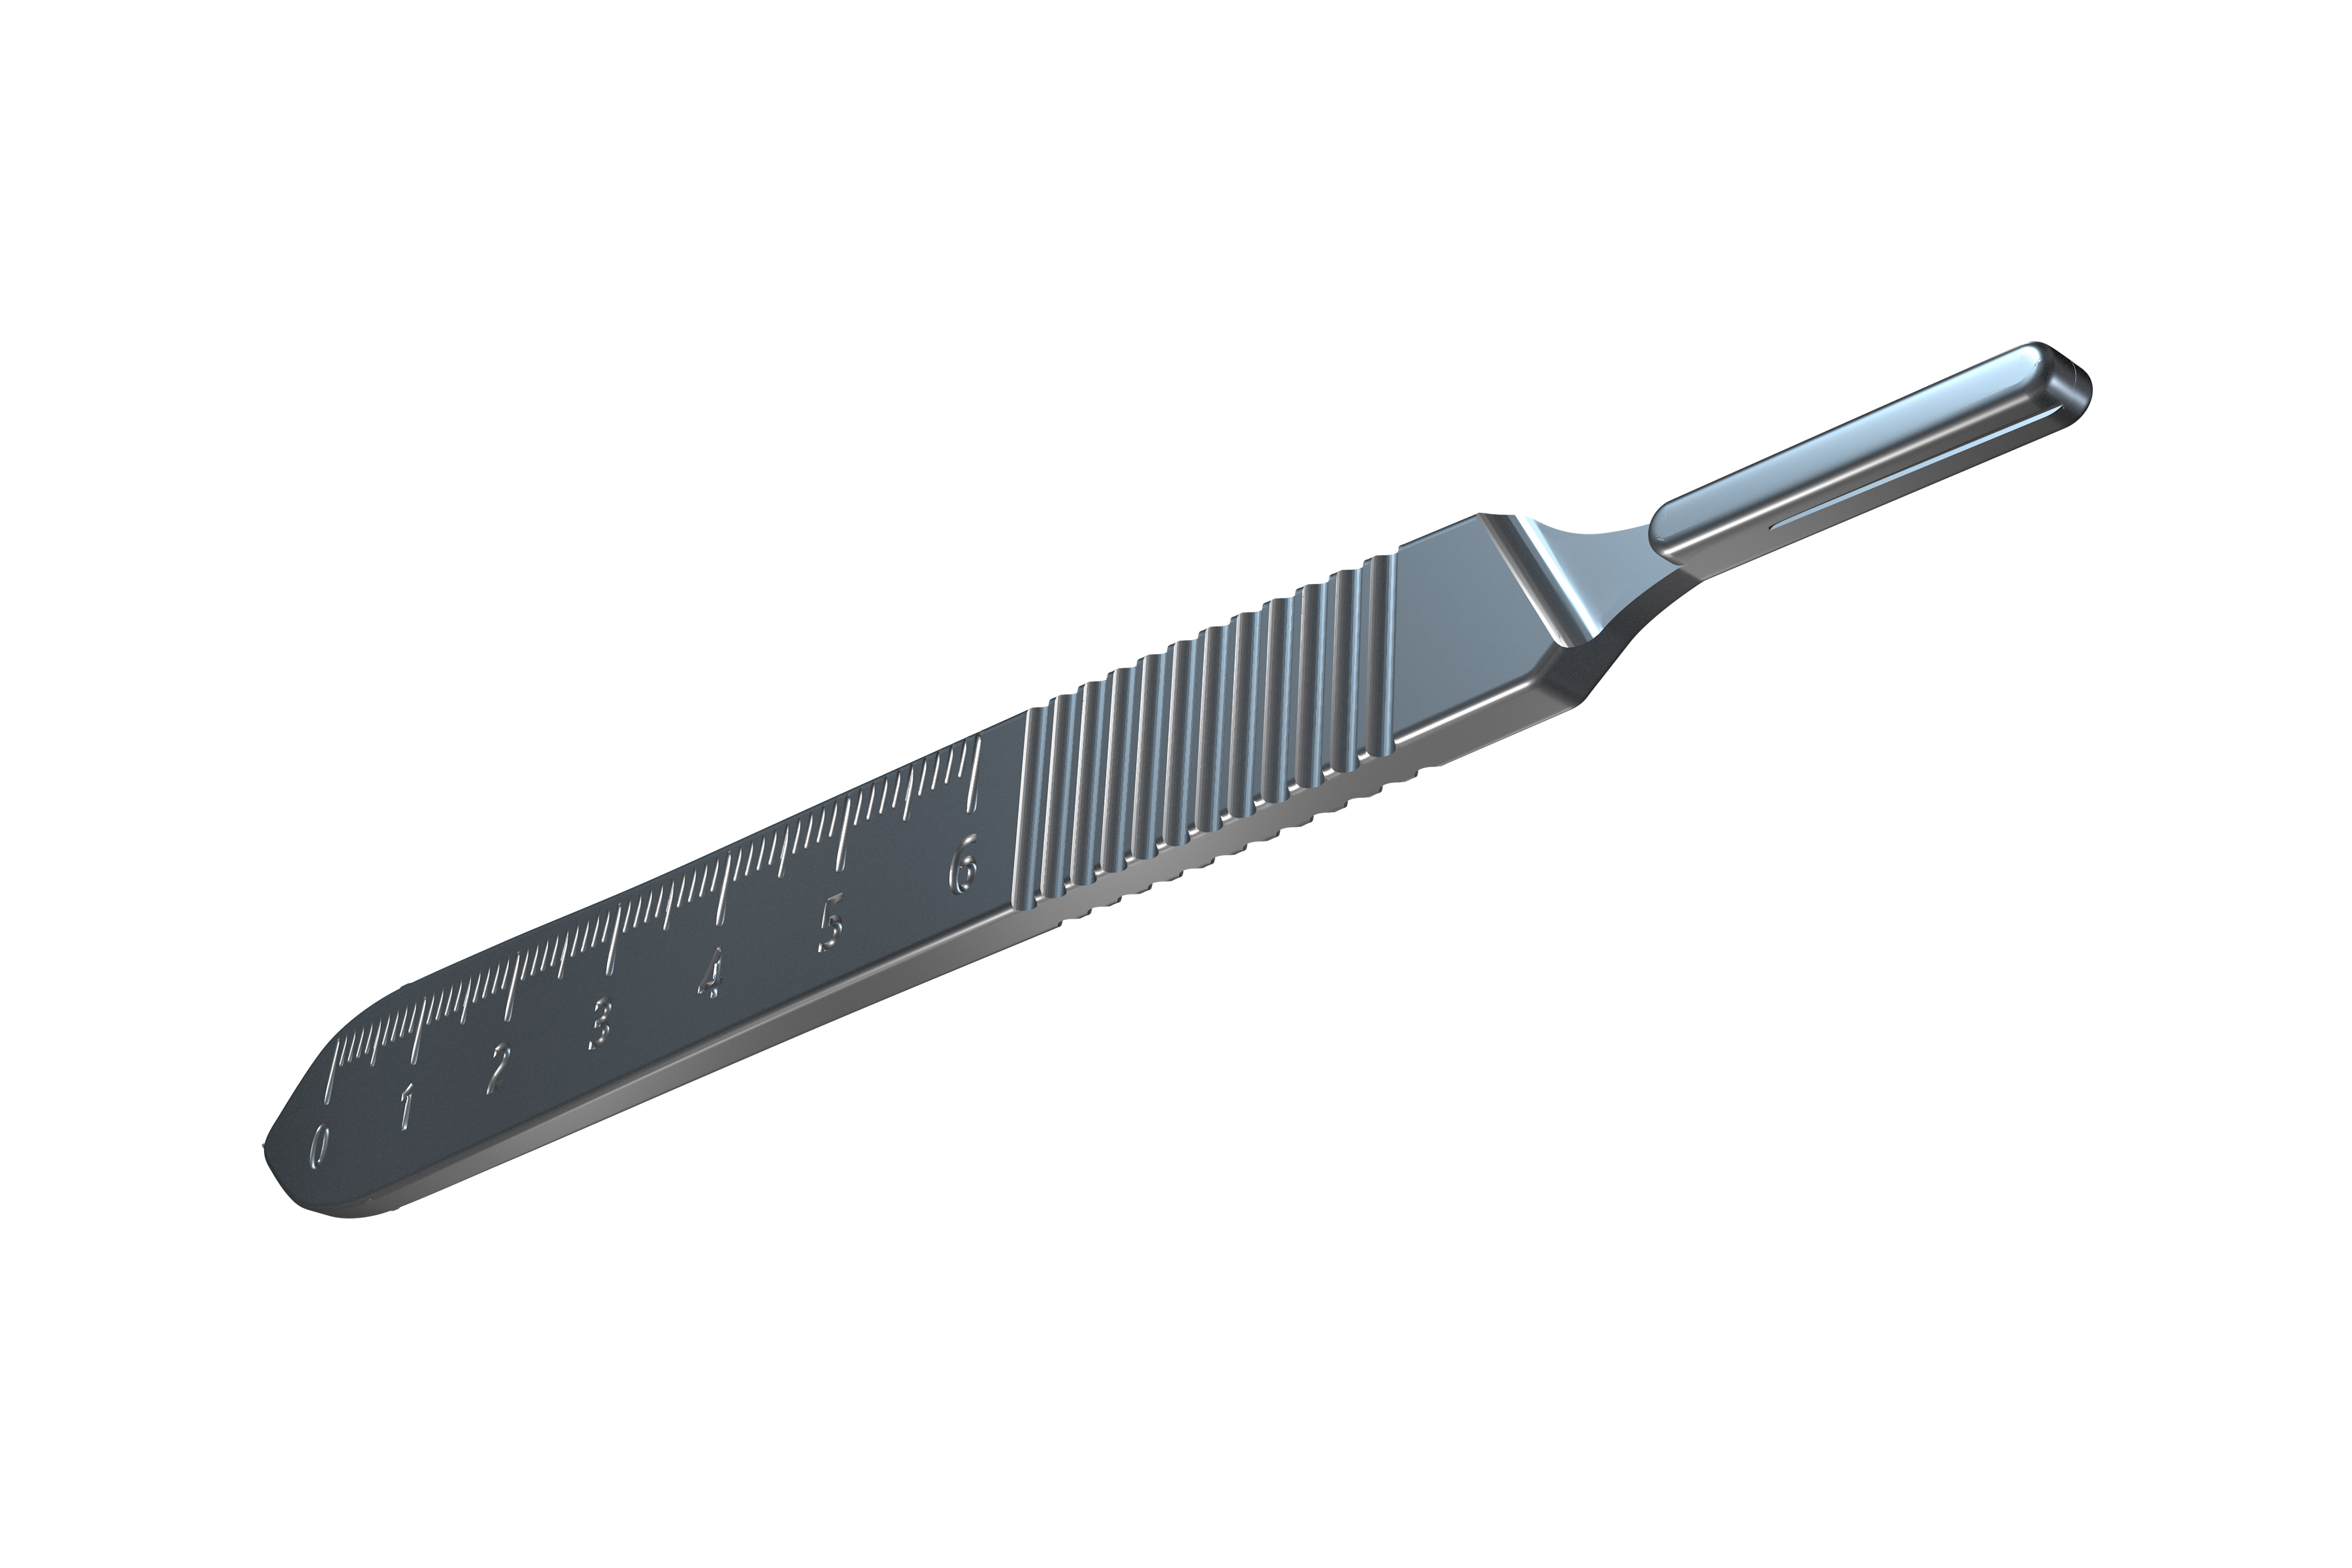 Category: Surgical Blades